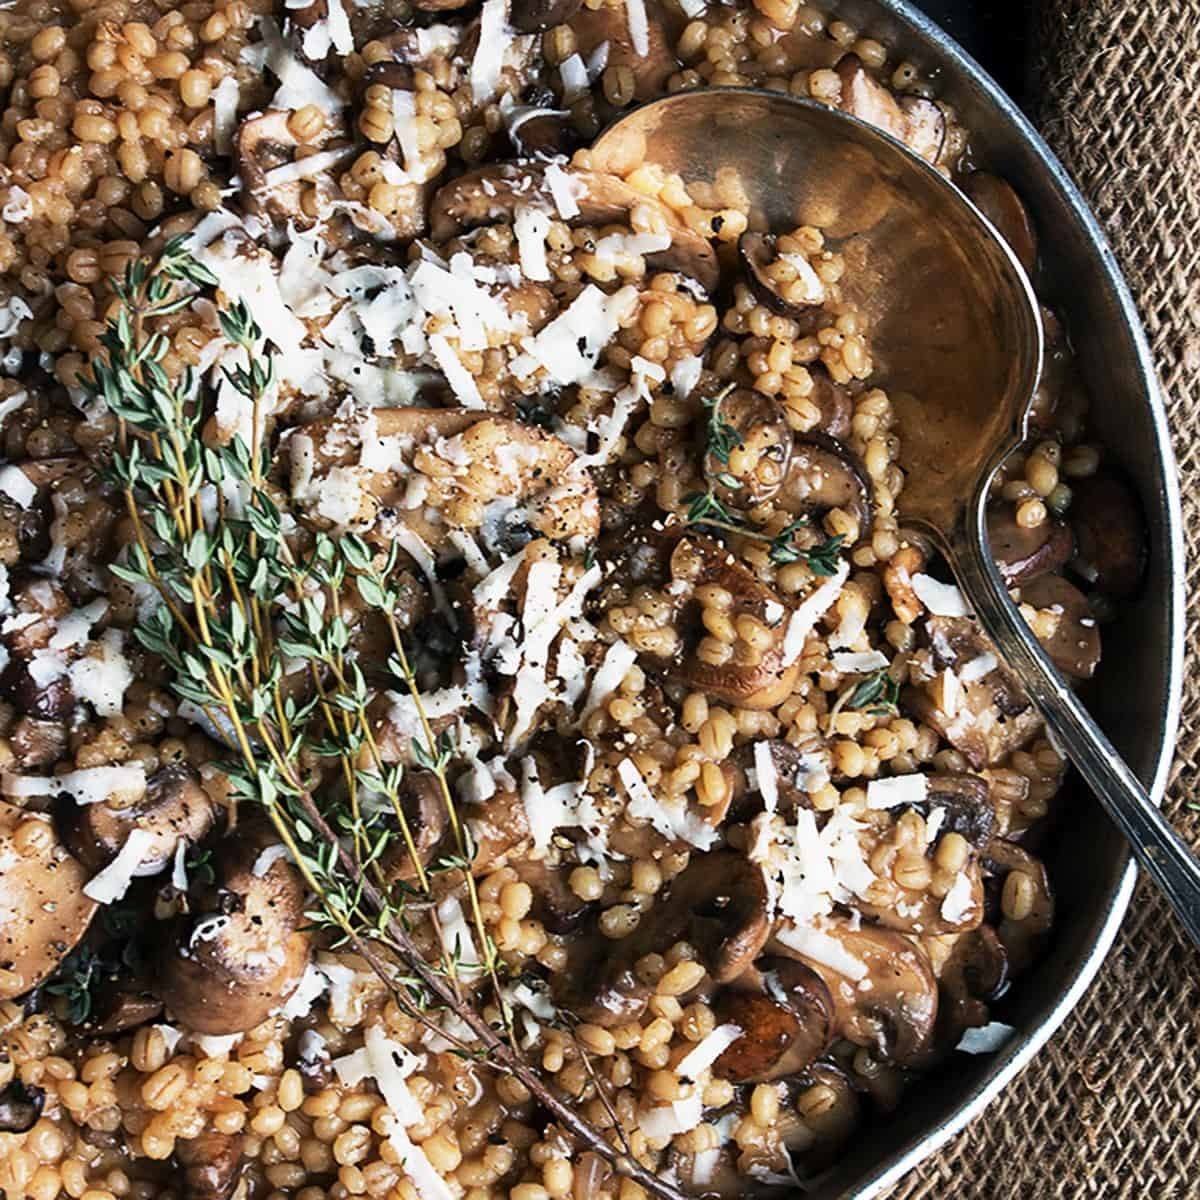 Barley risotto with mushrooms and thyme.